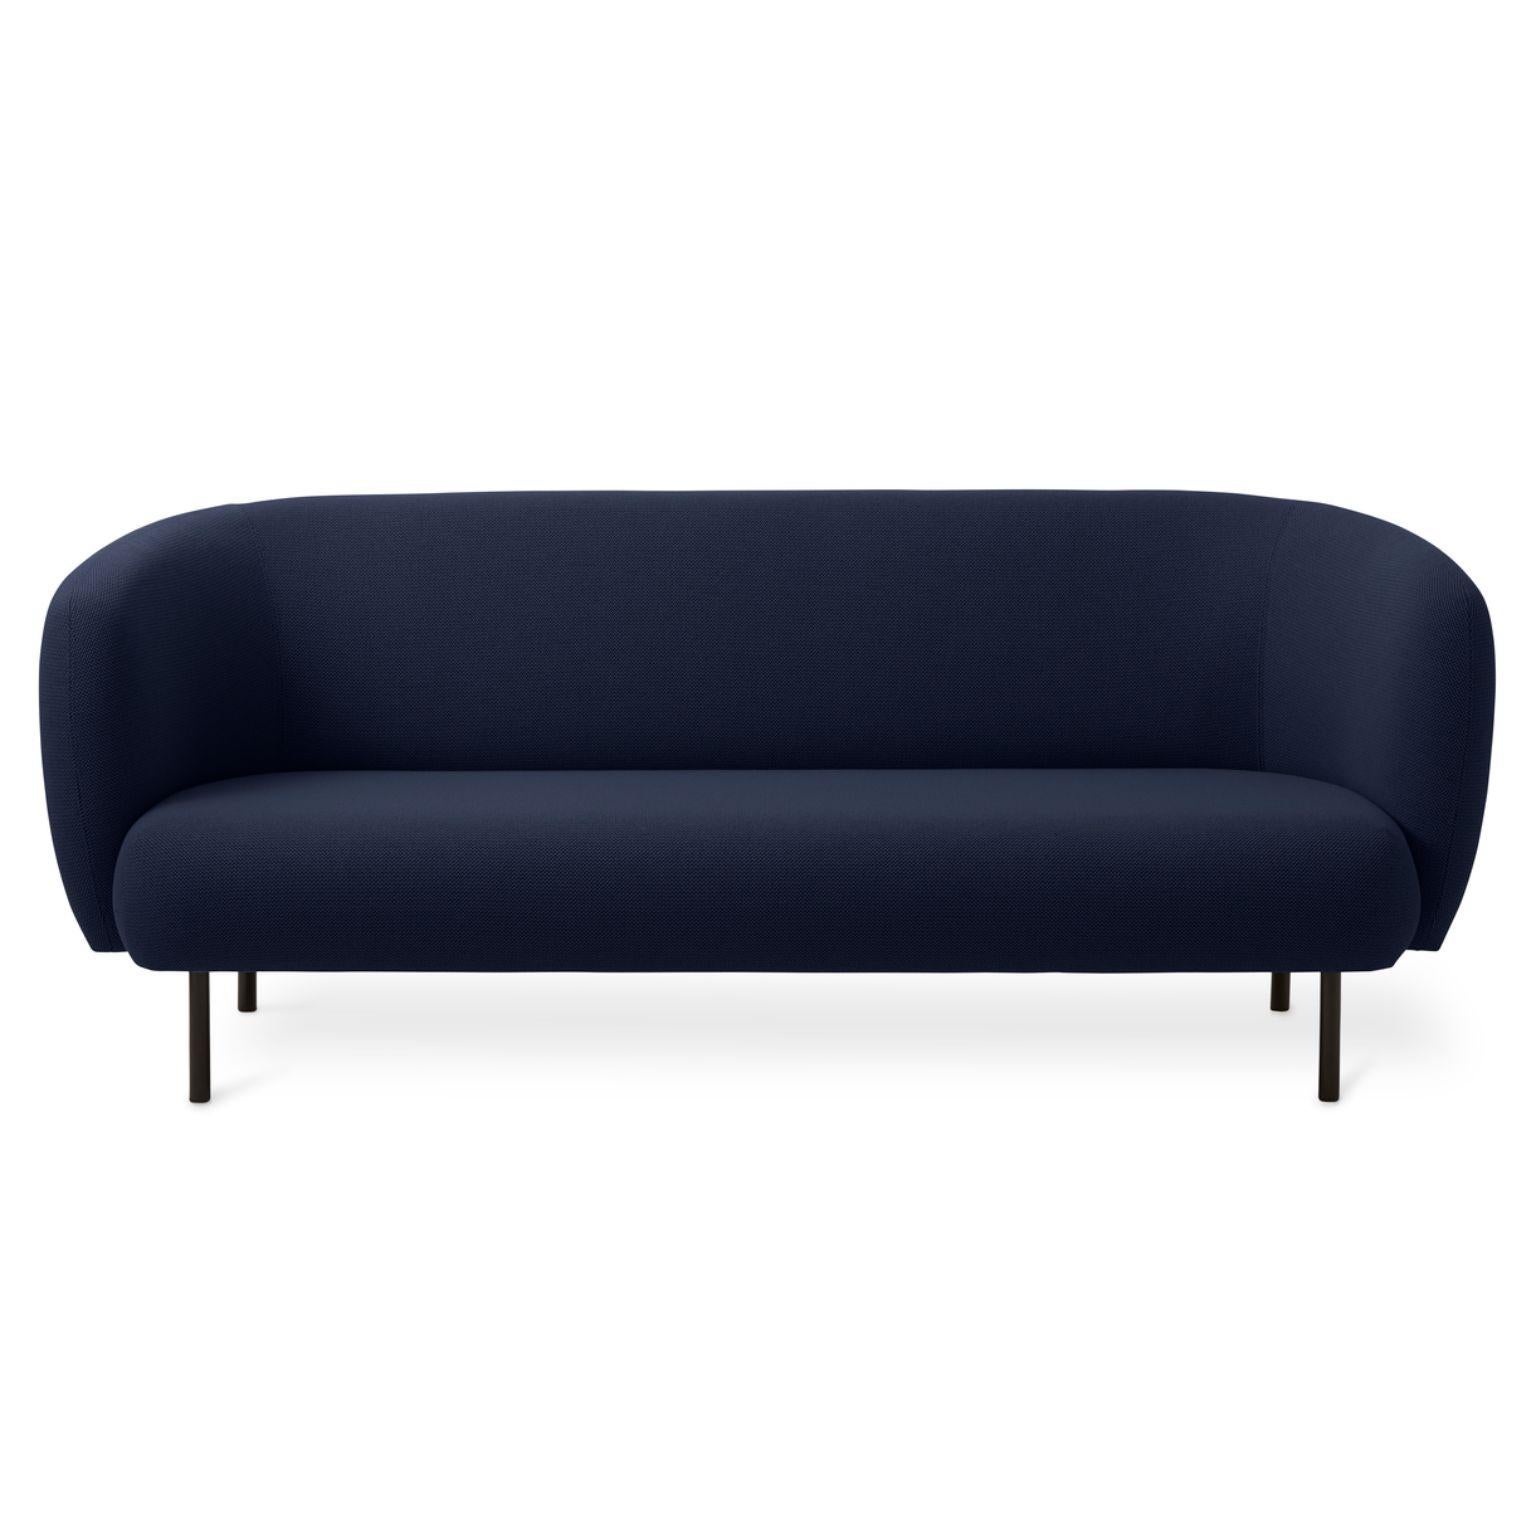 Caper 3 seater steel blue by Warm Nordic
Dimensions: D206 x W84 x H 63 cm
Material: textile upholstery, wooden frame, powder coated black steel legs.
Weight: 55.5 kg
Also available in different colours and finishes. 

An elegant sofa with an